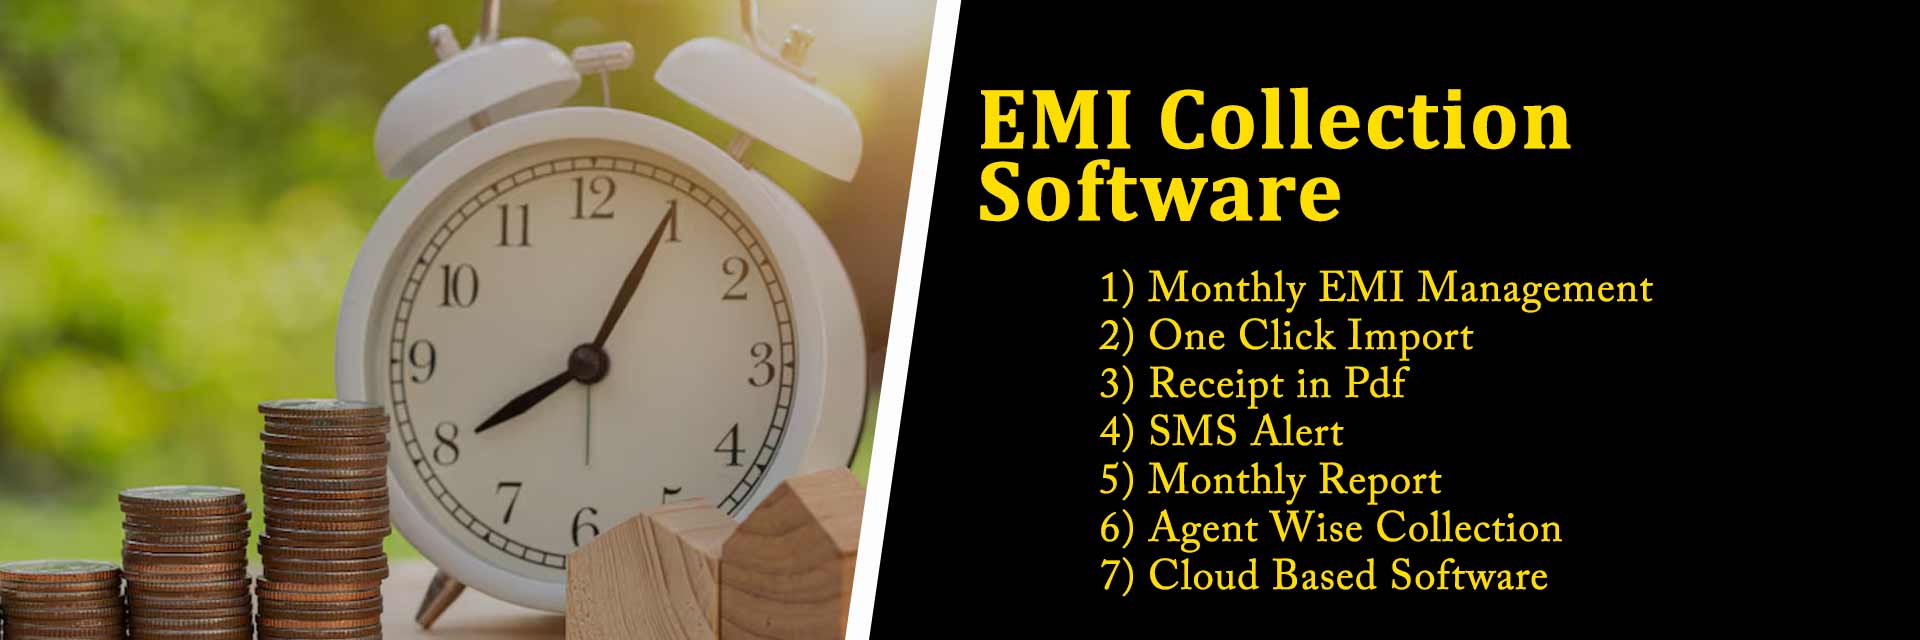 EMI Collection Software in Nagpur